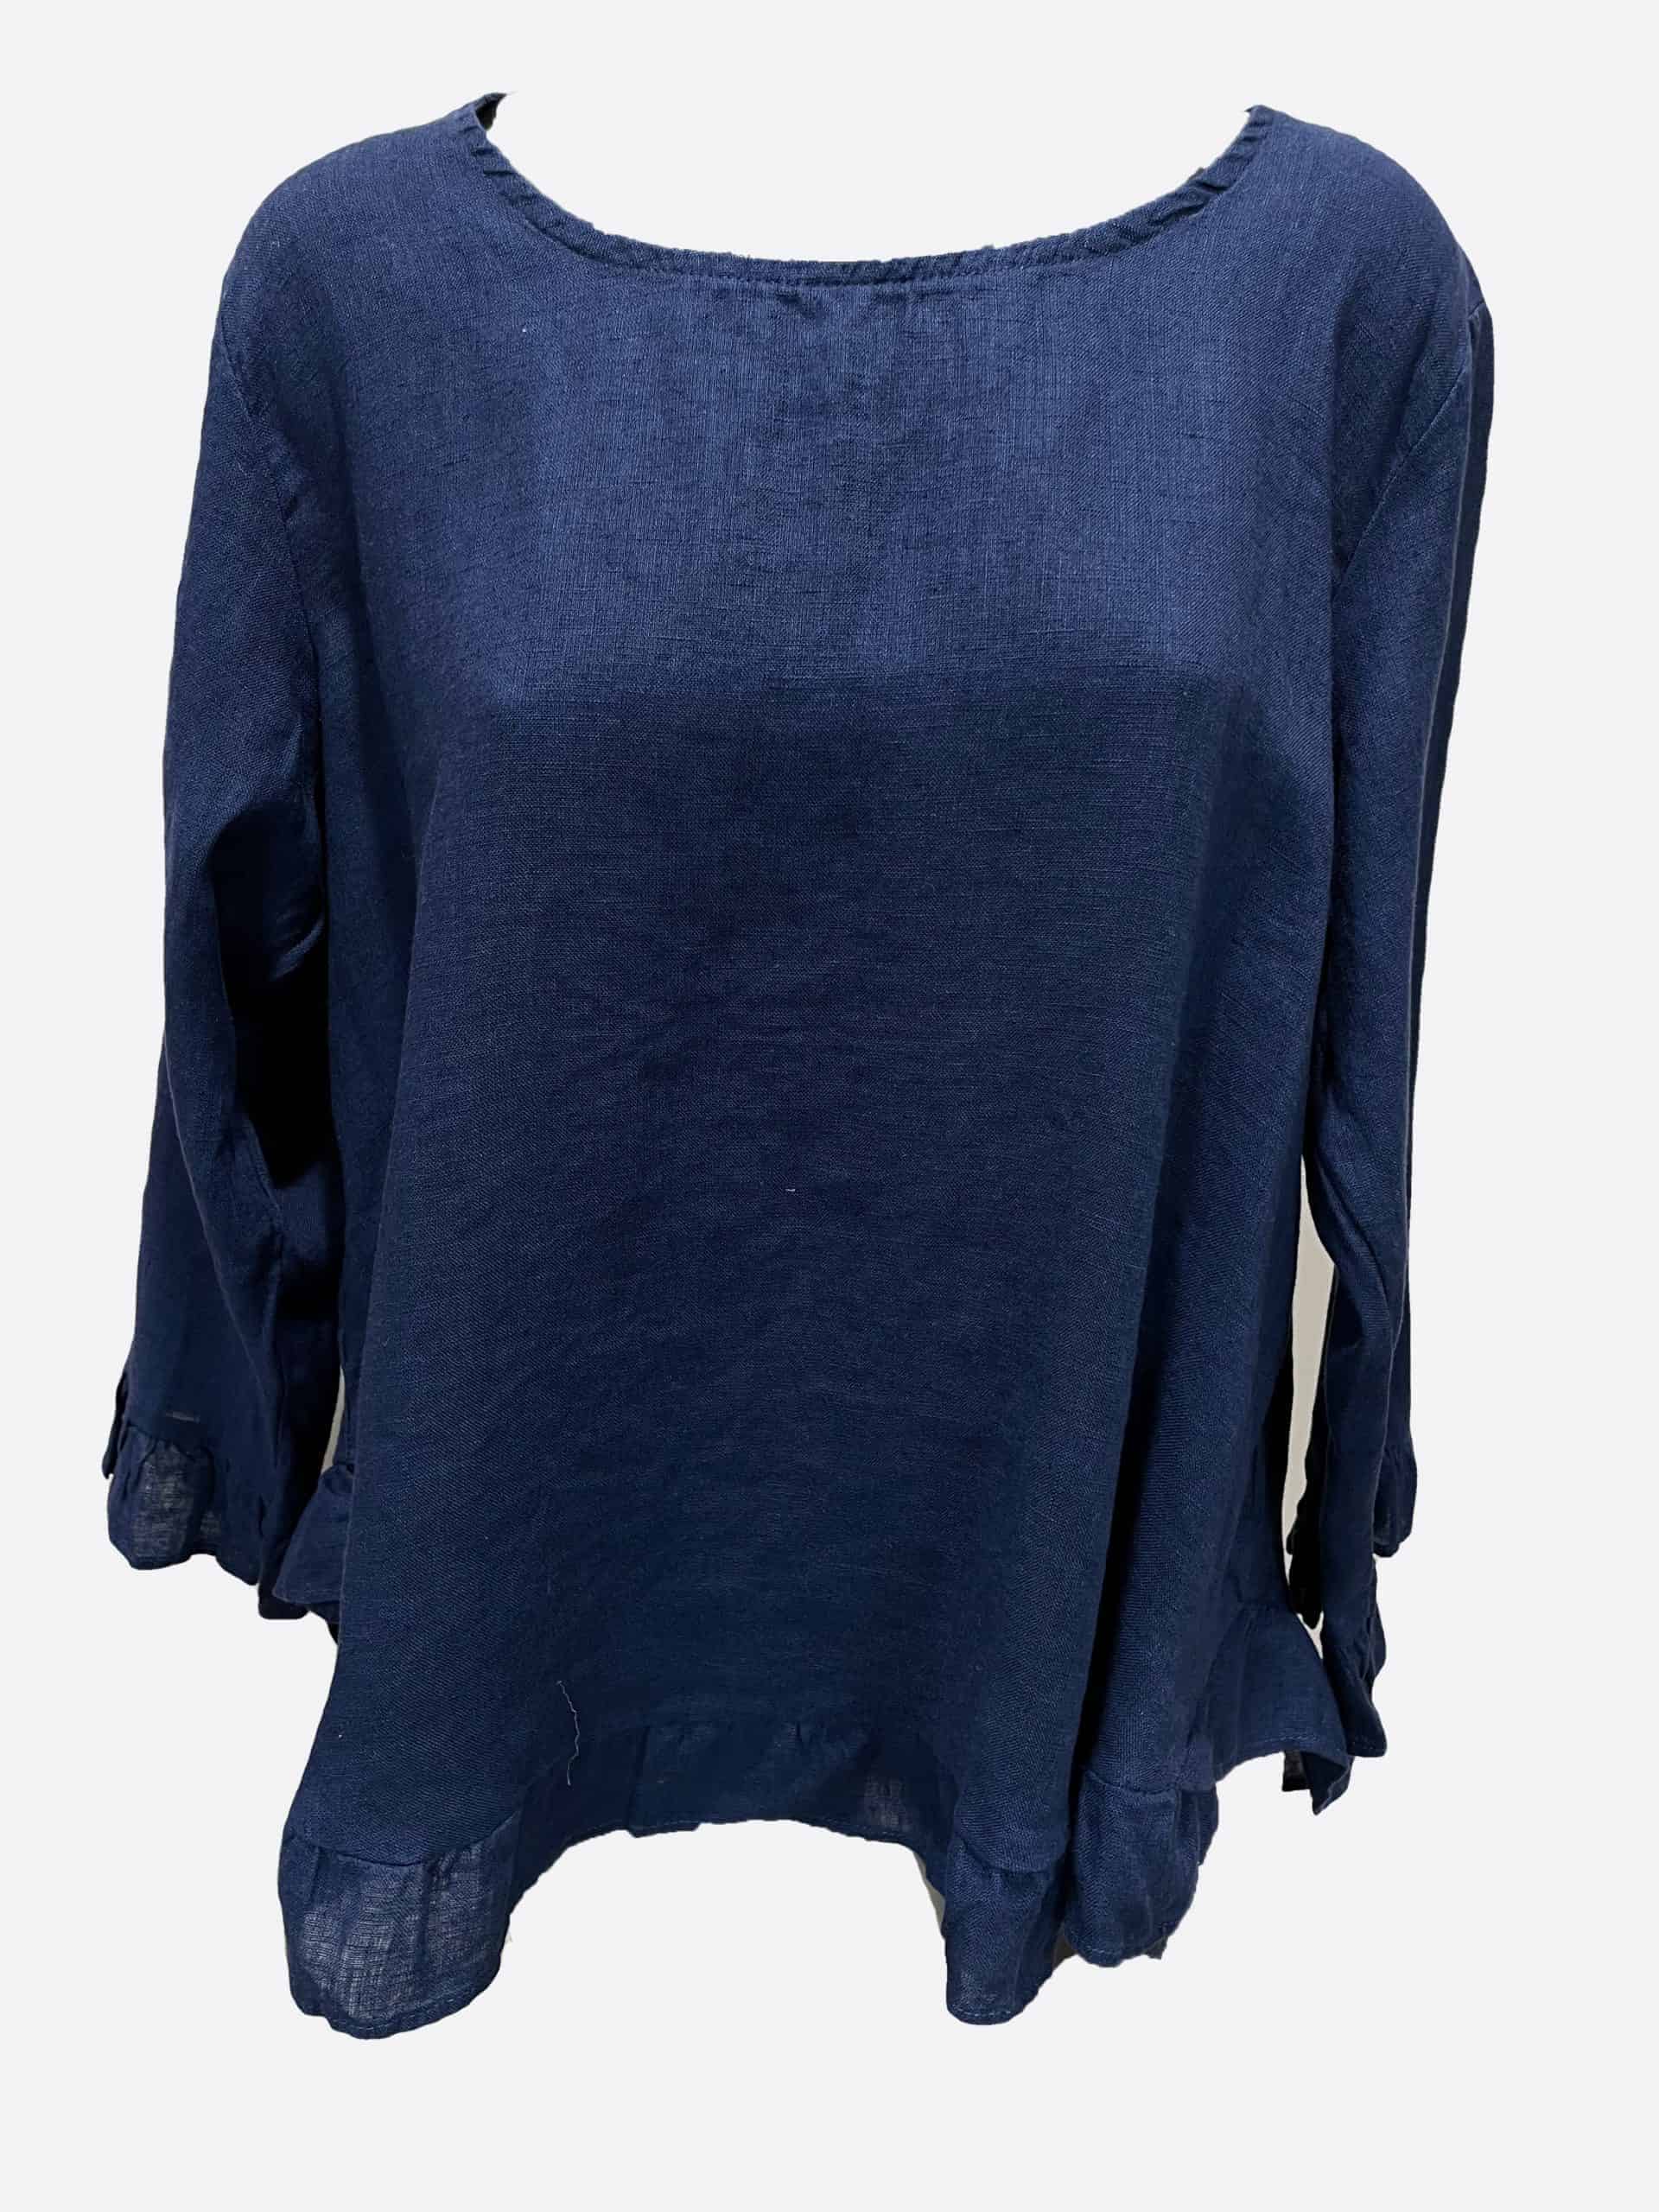 LS Ruffle Top - Navy - Worthier - Florence Store